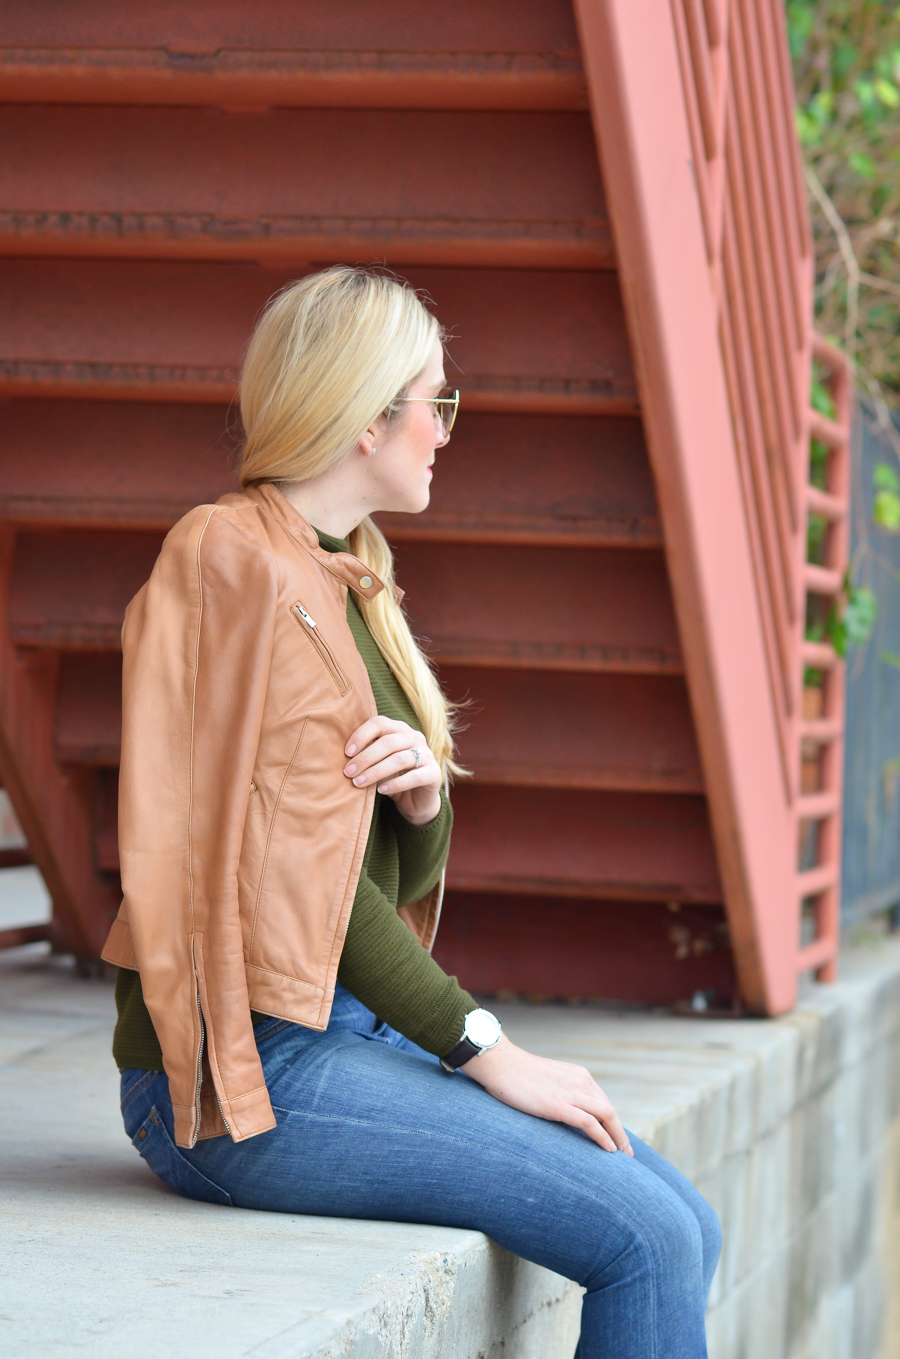 Rewear Wednesday - Tan Leather Jacket Outfits